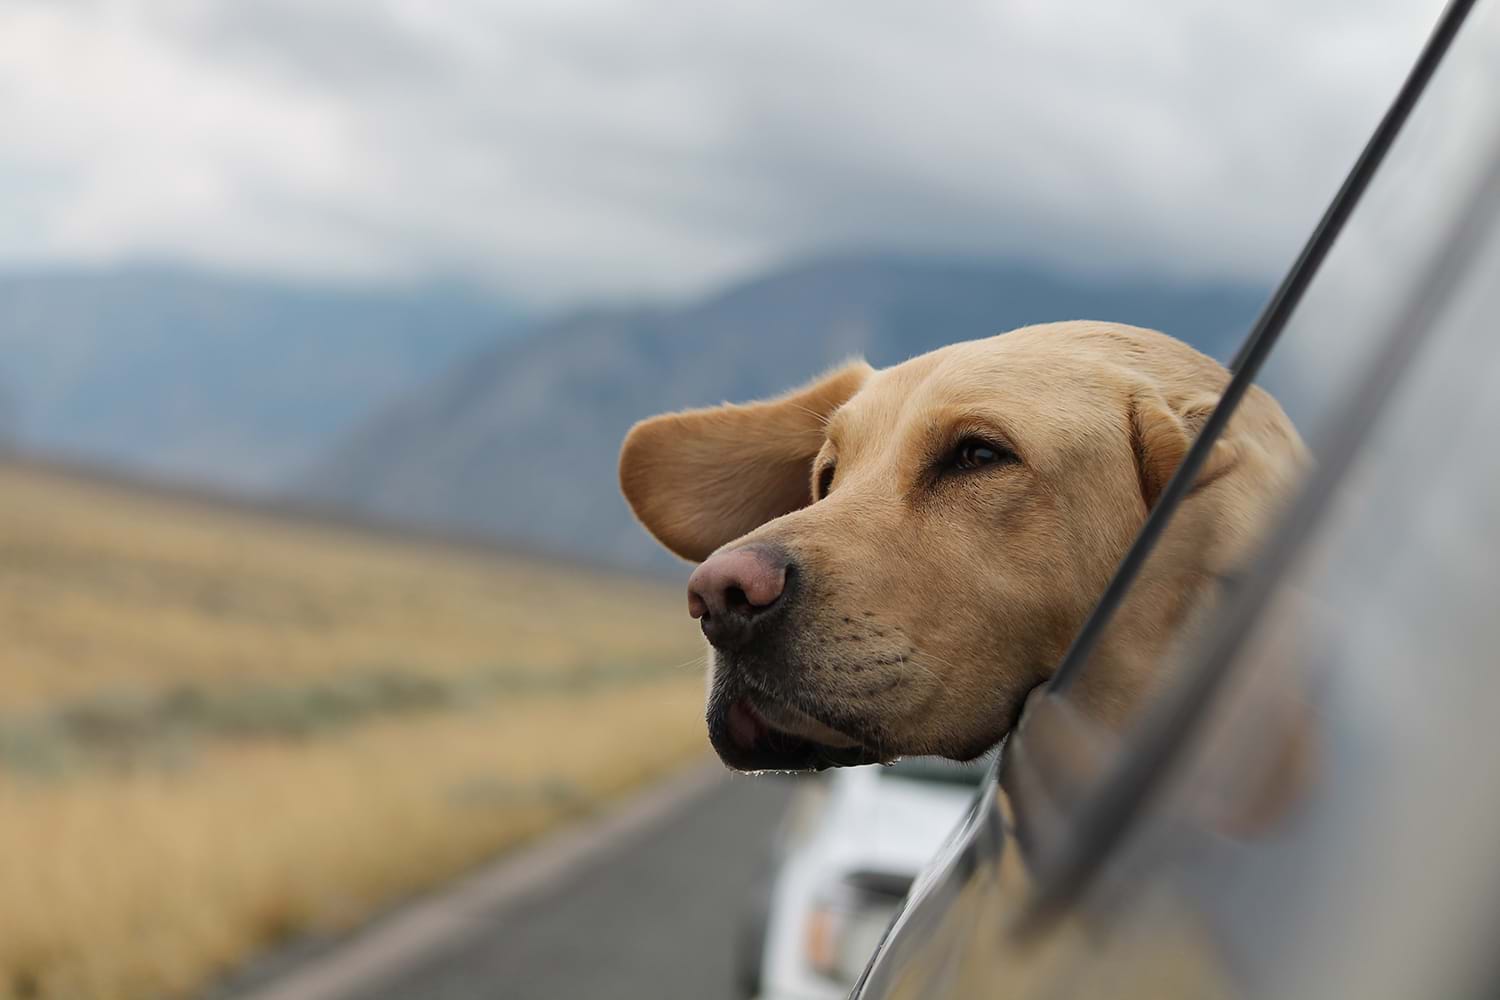 Dog sticking it's head out car window